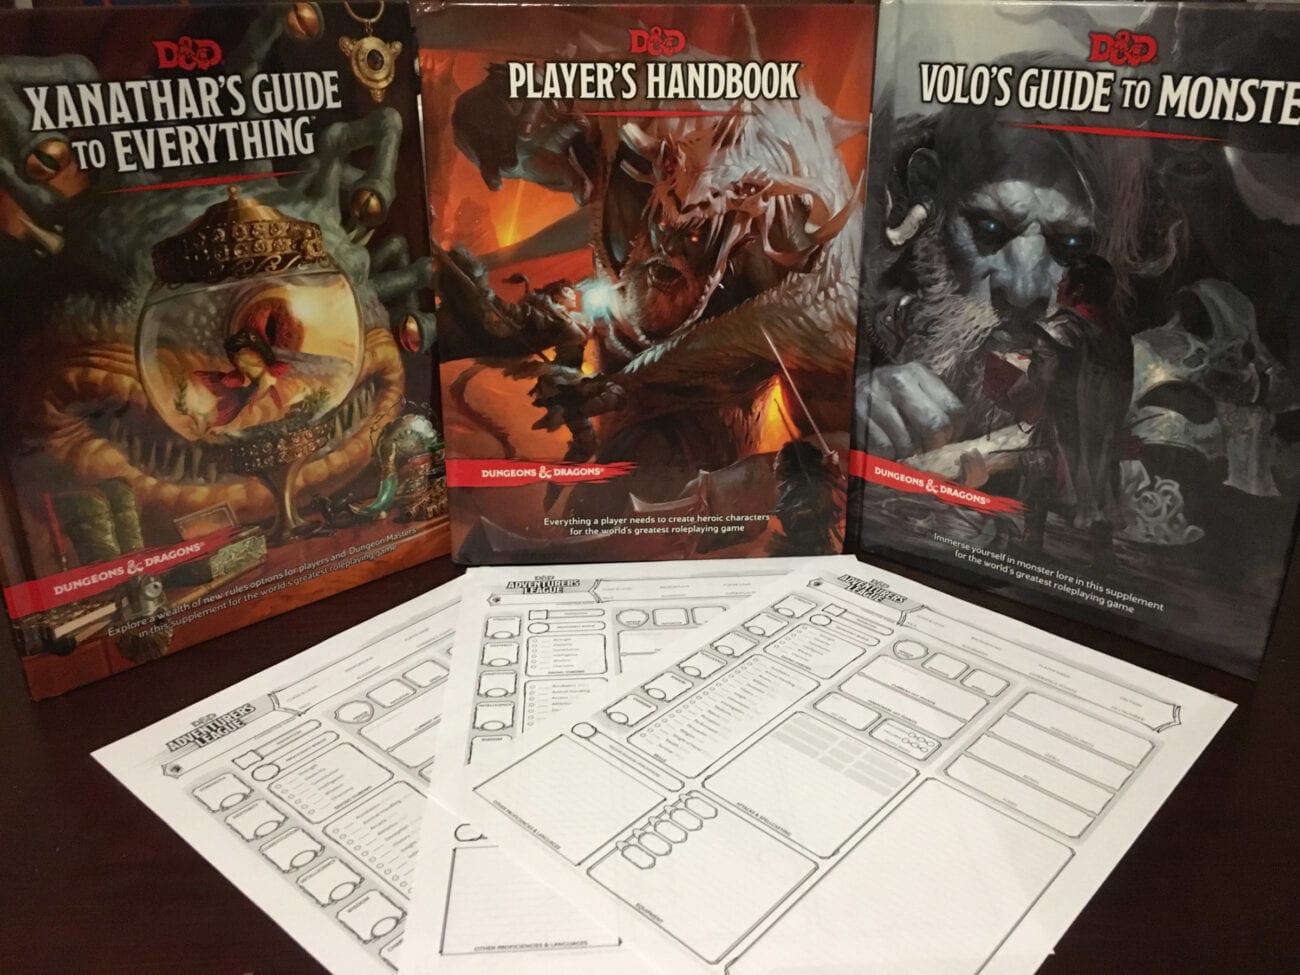 Did you buy your new Dungeons & Dragons rulebooks yet? Learn the new changes for the fifth edition, what's great, and what's not.